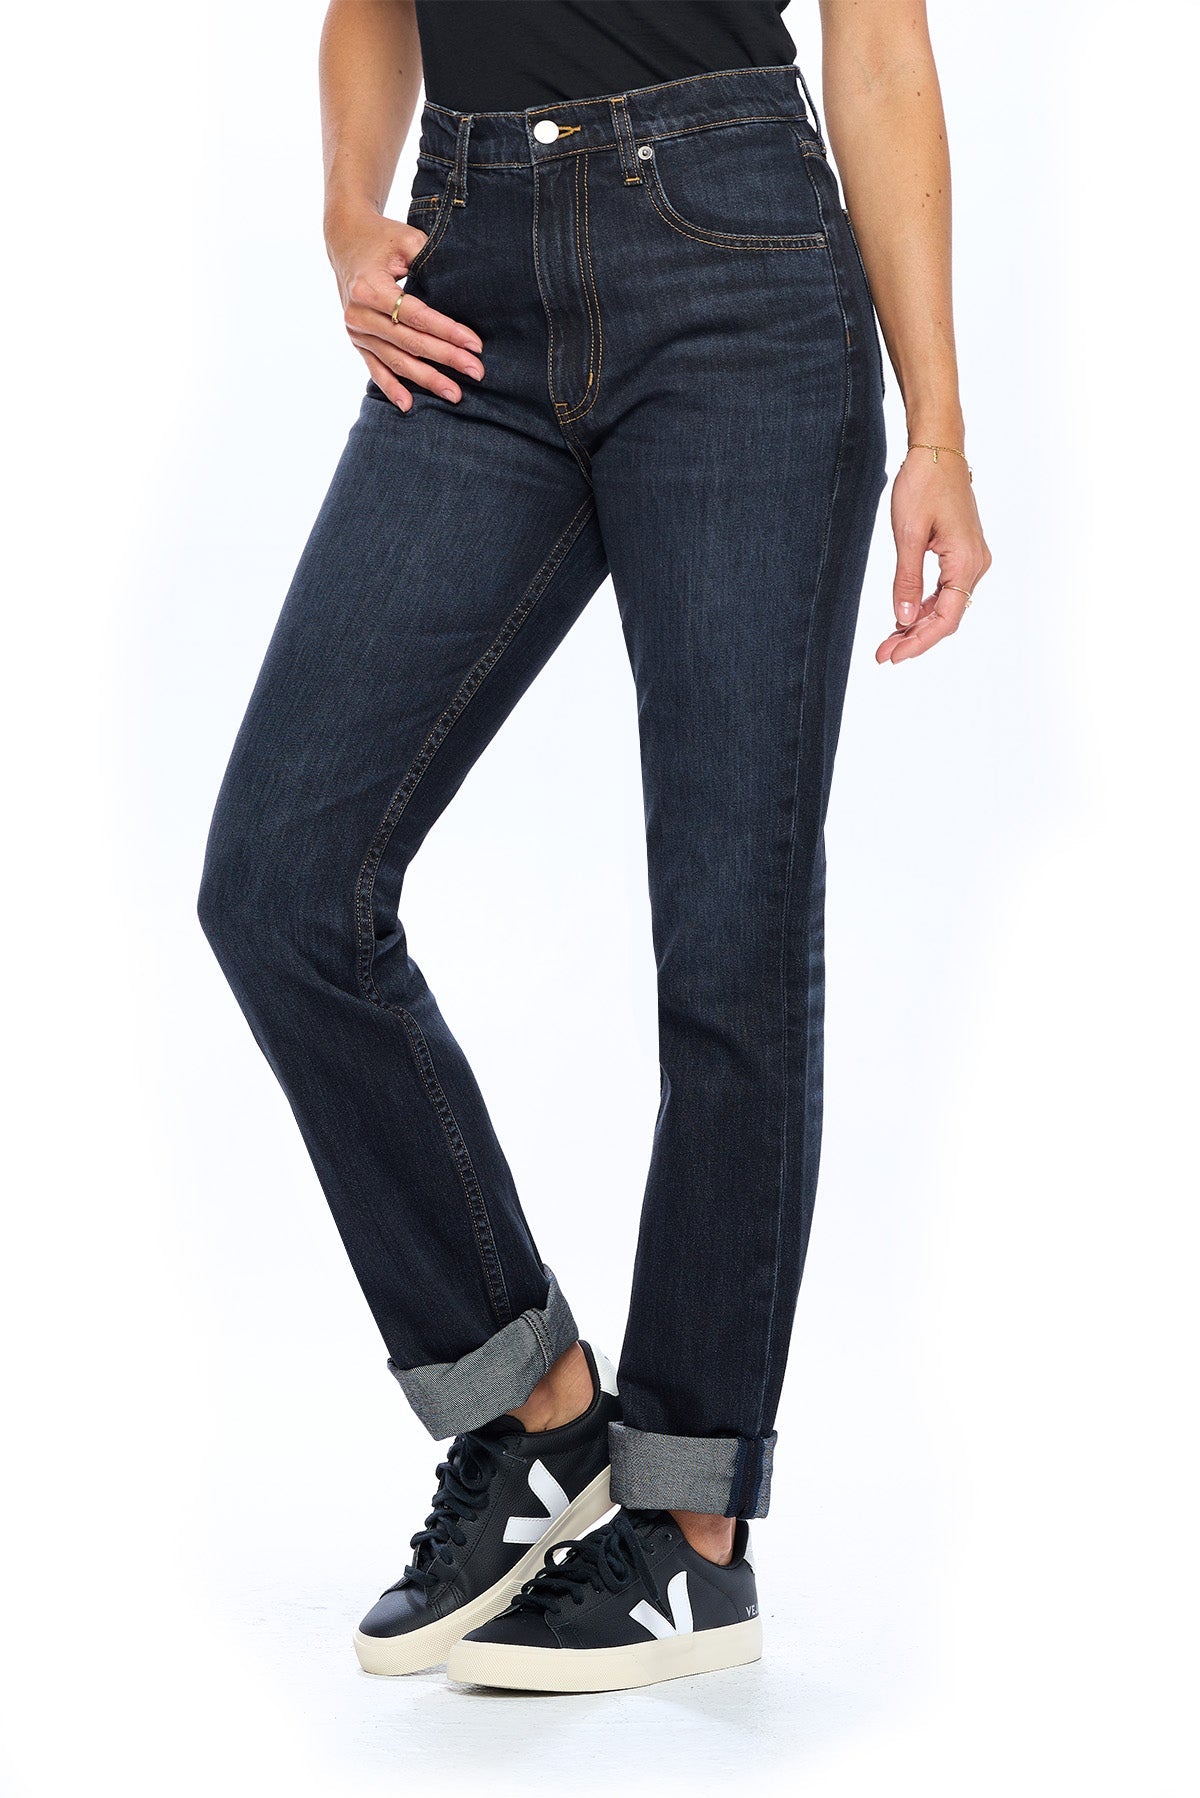 Best Travel Jeans | Relaxed Straight